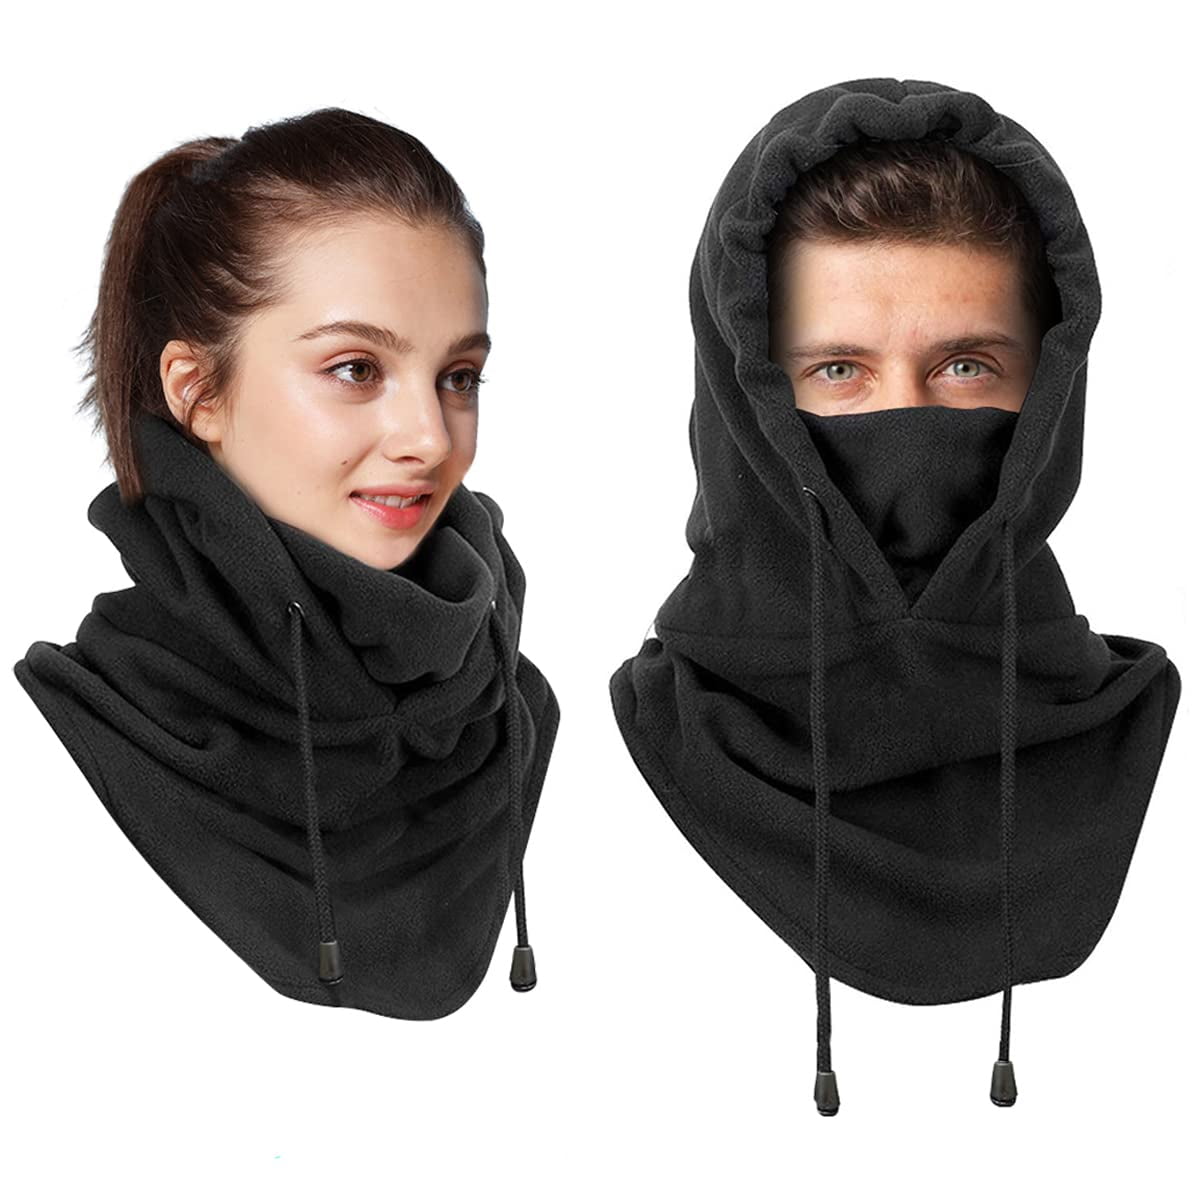 Running Ski Face Mask Waterproof Windproof Protection for Ski Unisex Winter Fleece Neck Cover Universal Size SGODDE Motorcycle Balaclava Cycling Motorcycle Hiking